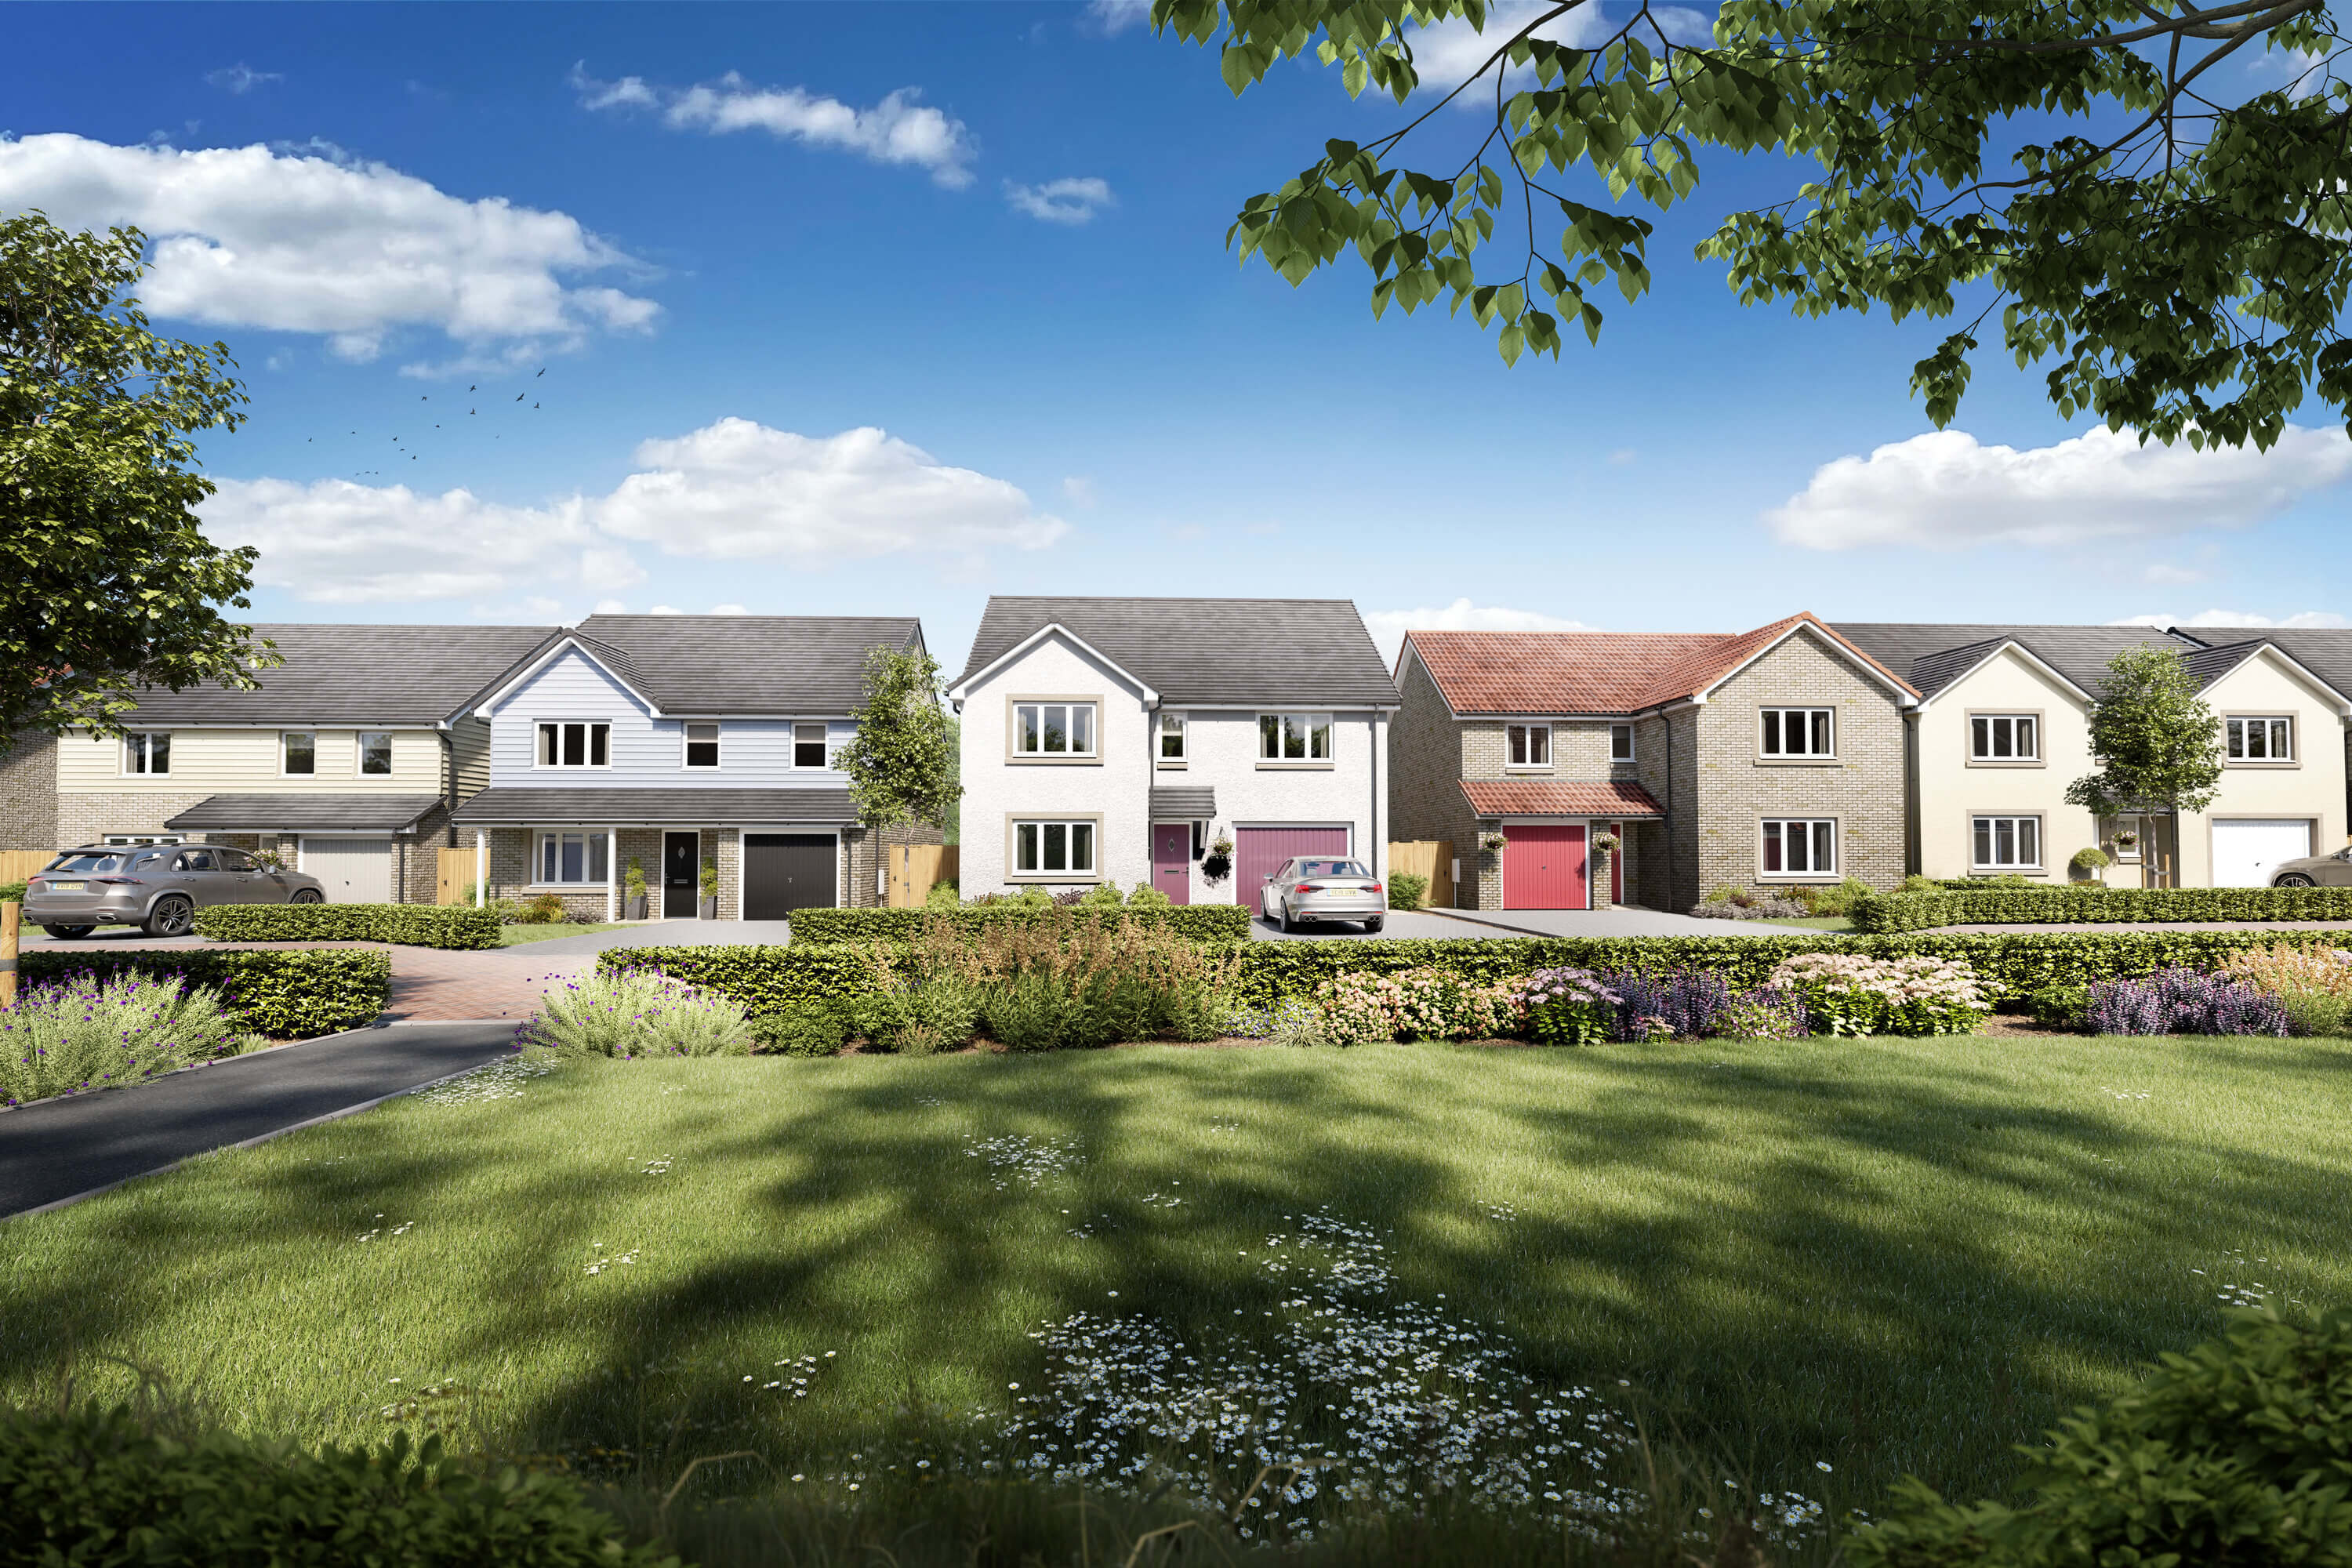 Land acquired to enable Taylor Wimpey's next development in East Calder